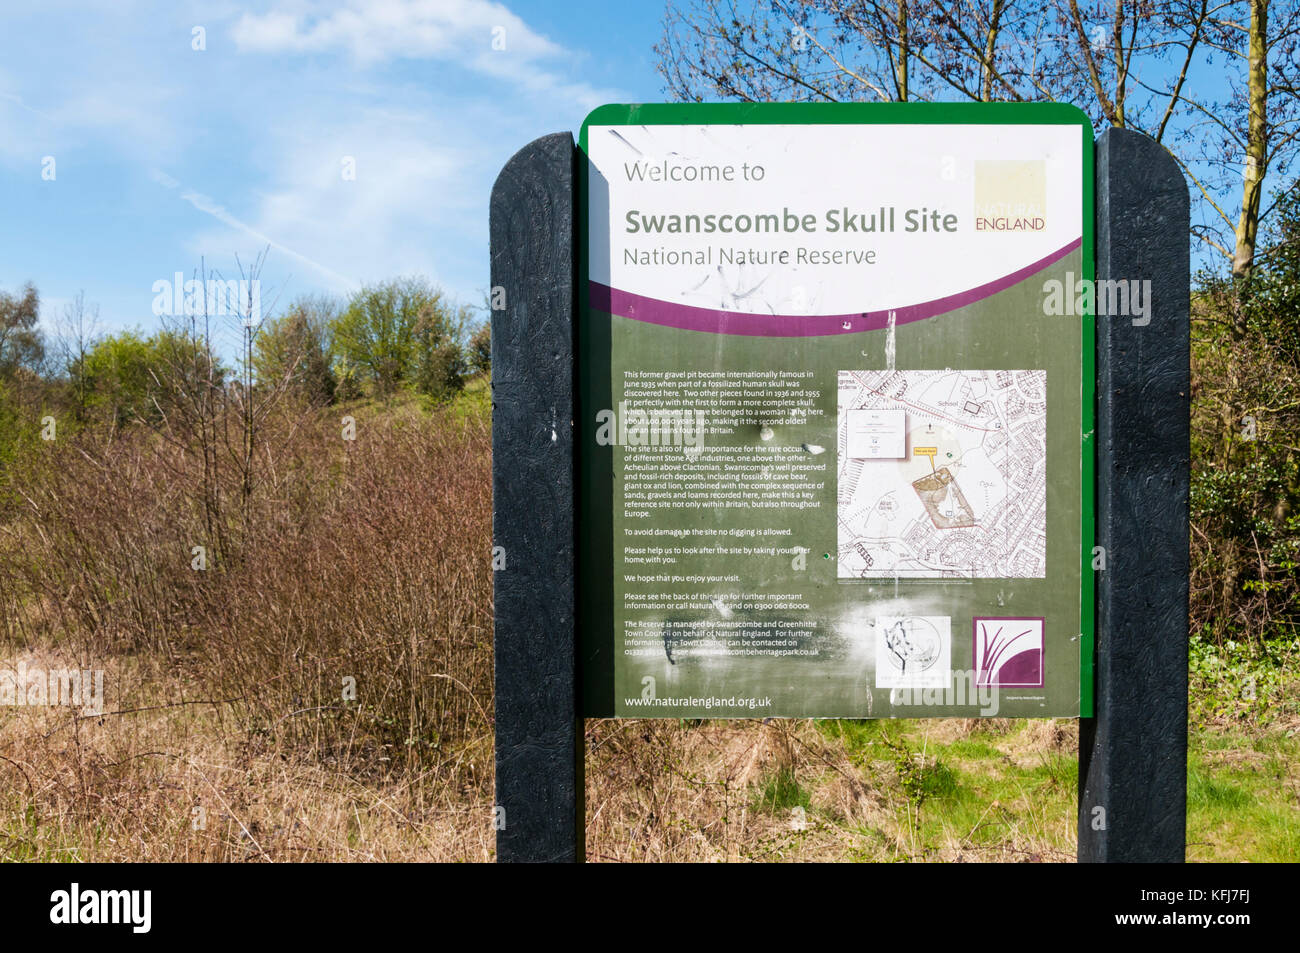 Sign at entrance to Swanscombe Skull Site where Swanscombe Skull found in 1935. Now in Swanscombe Heritage Park & Skull Site National Nature Reserve. Stock Photo